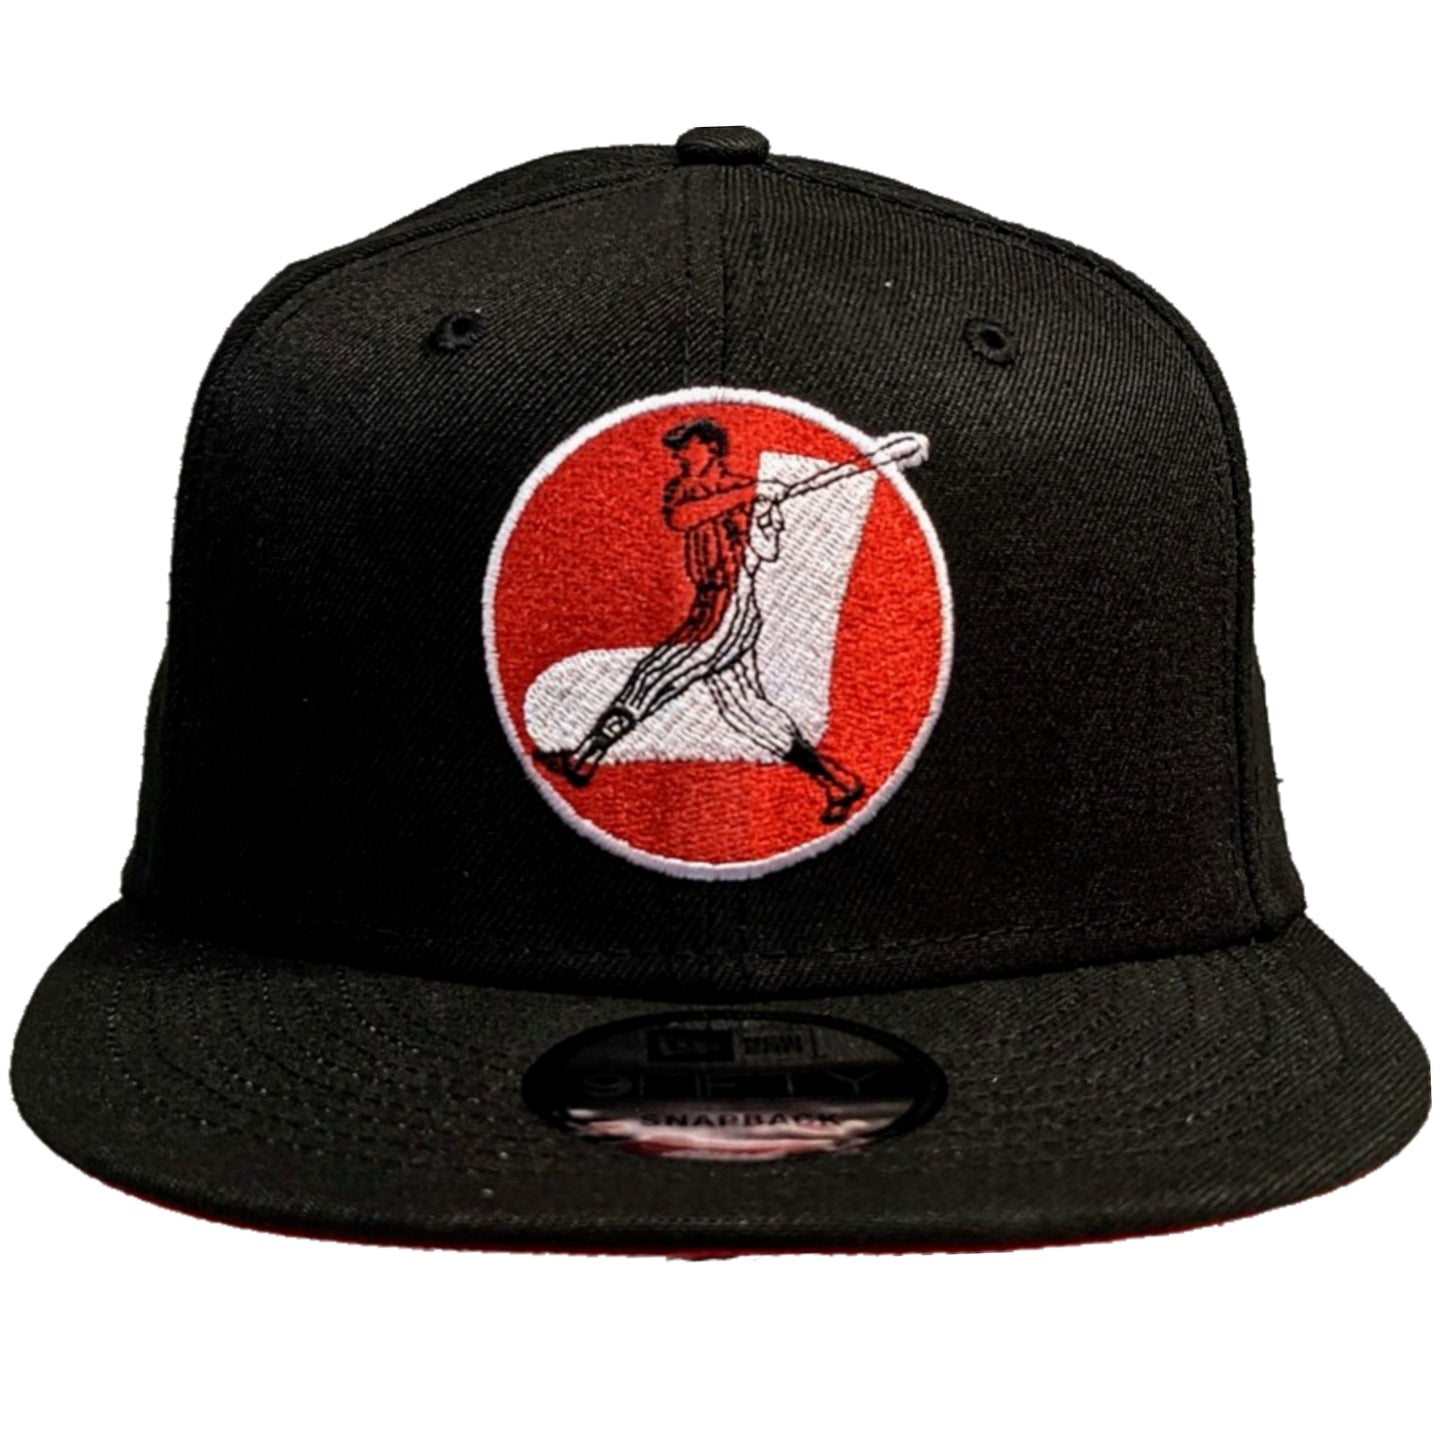 Mens Chicago White Sox New Era Black Cooperstown Collection 1960-1972 Logo 9FIFTY Snapback Hat